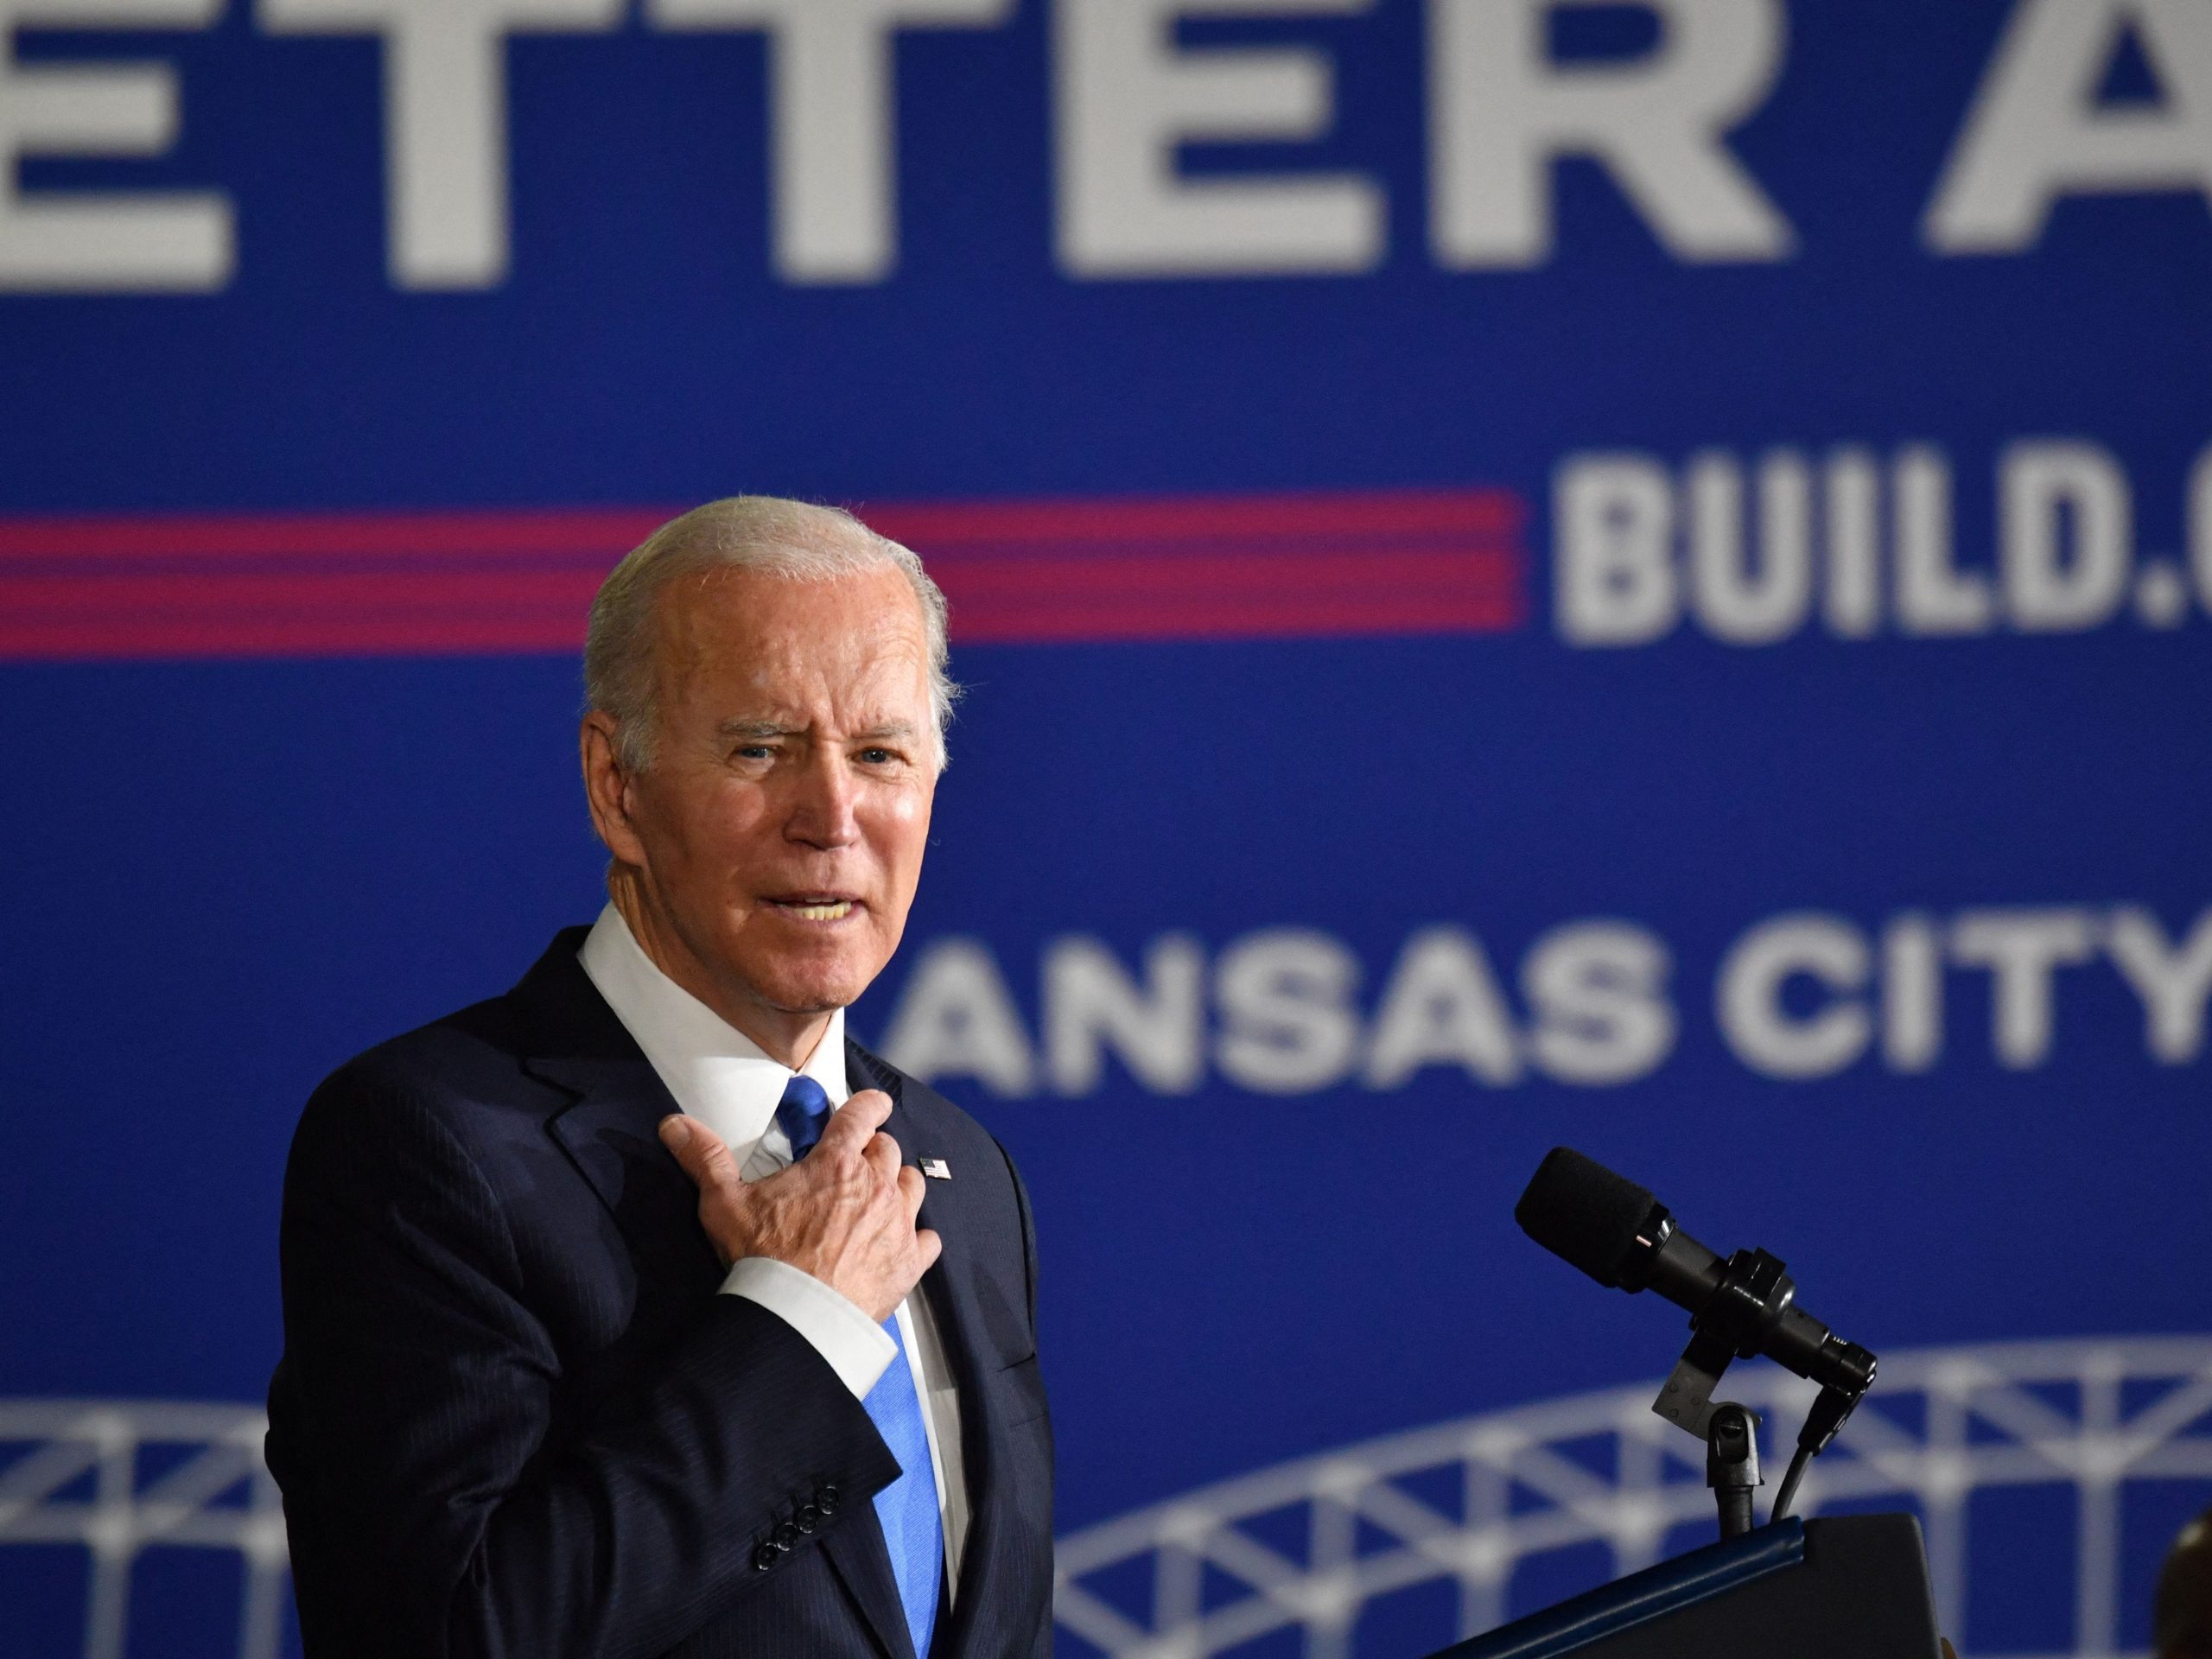 US President Joe Biden speaks about the Infrastructure Law while visiting the Kansas City Area Transportation Authority in Missouri on December 8, 2021.